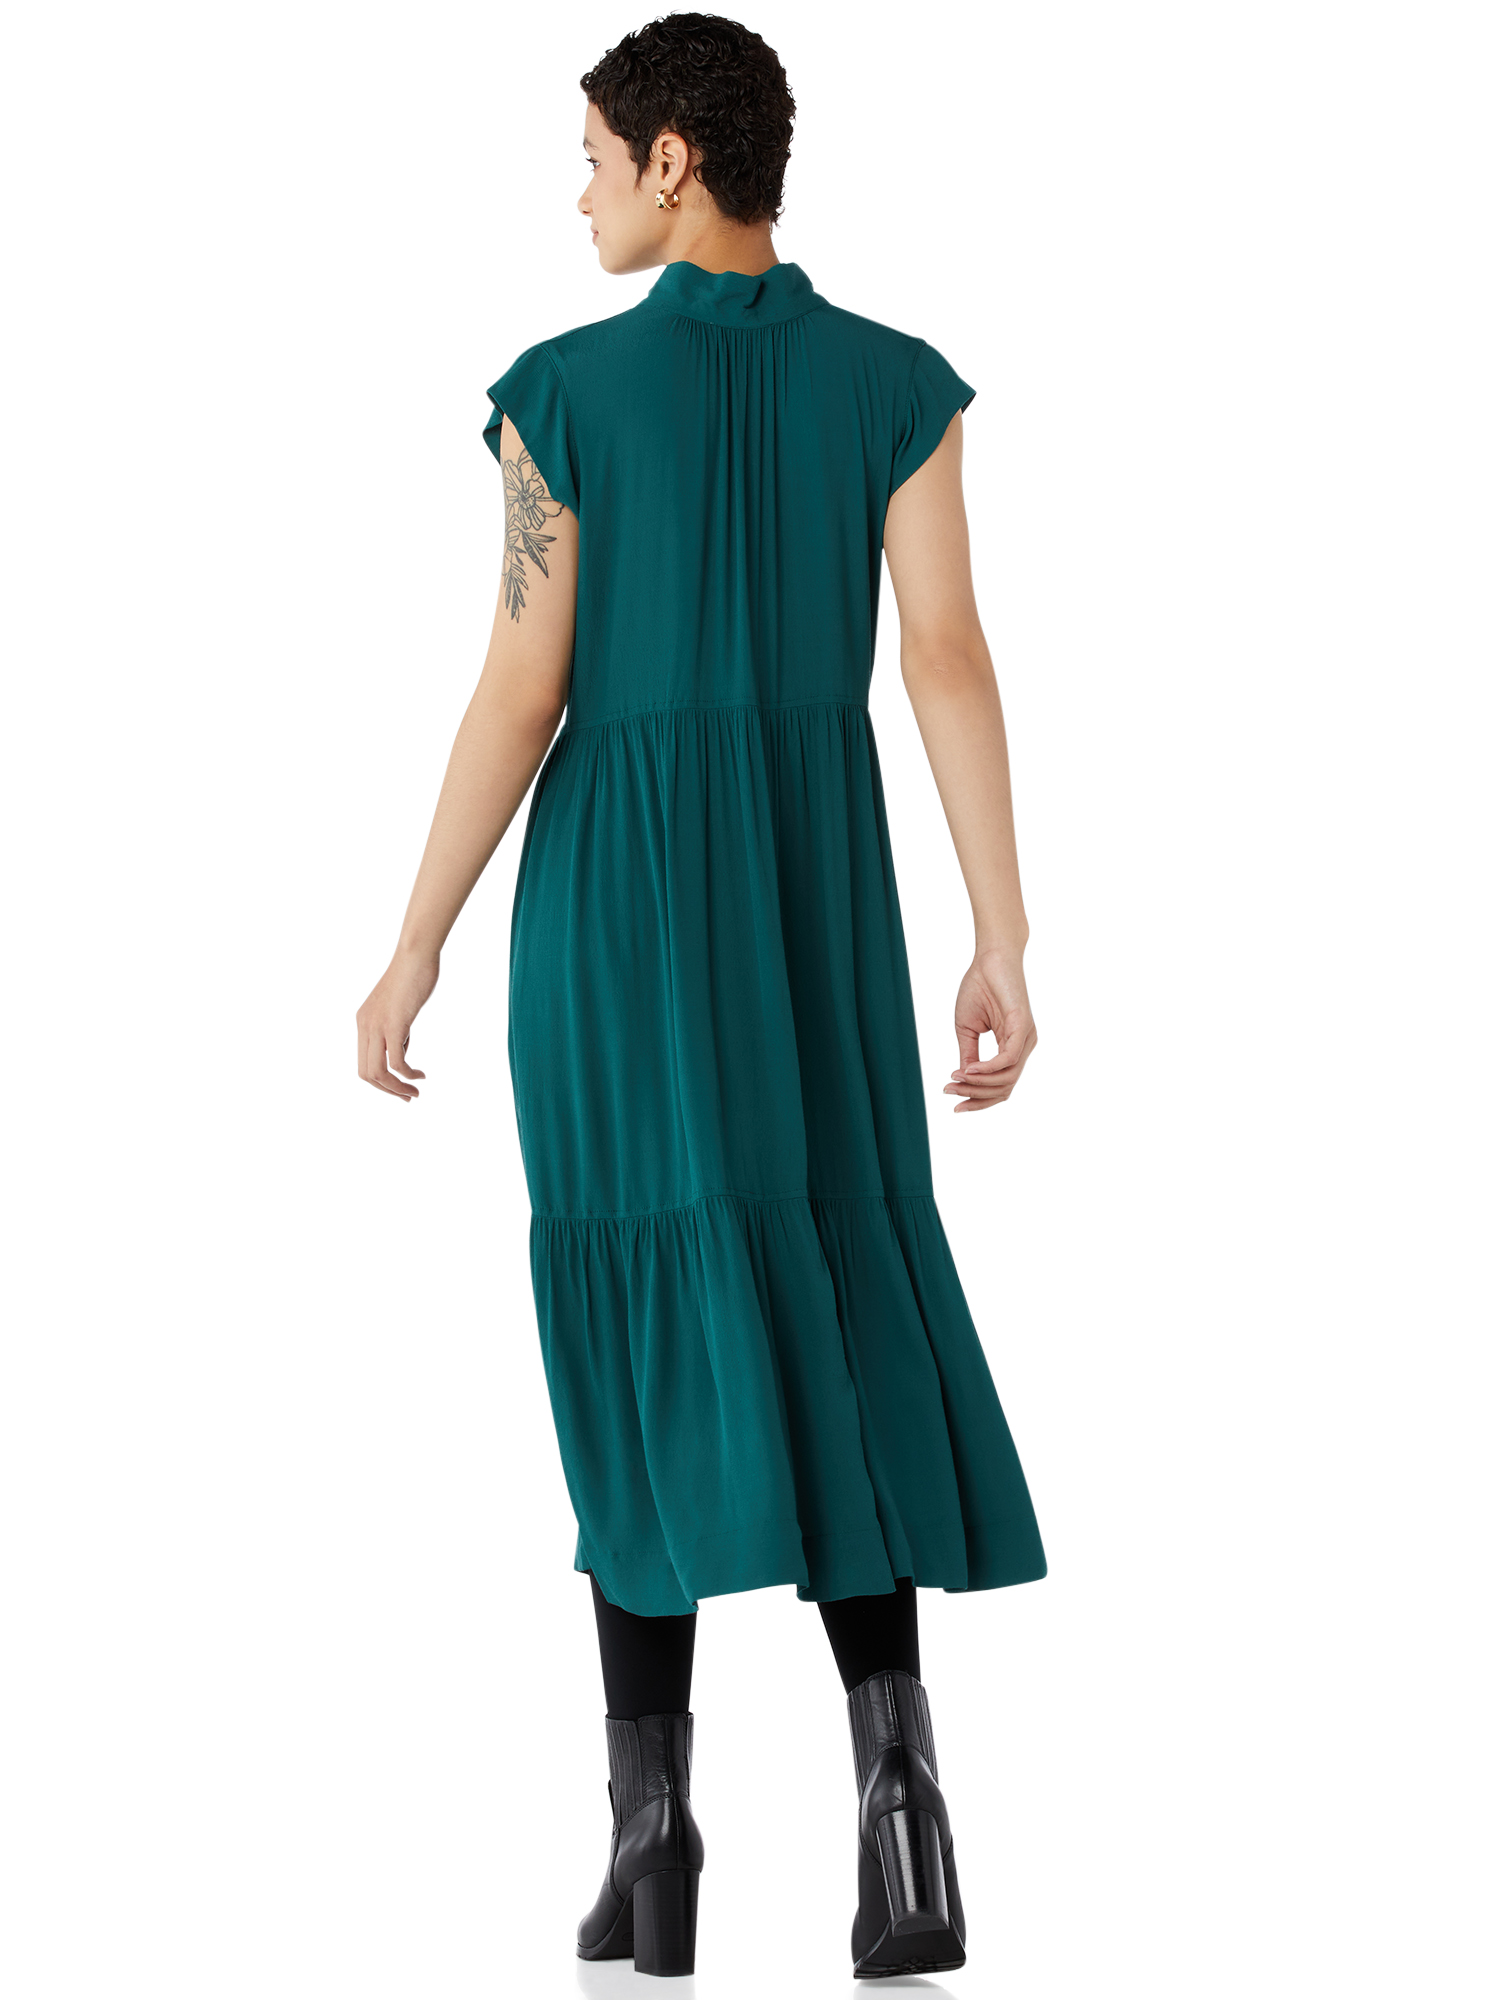 Free Assembly Women’s Sleeveless Tie Back Tiered Midi Dress - image 4 of 6